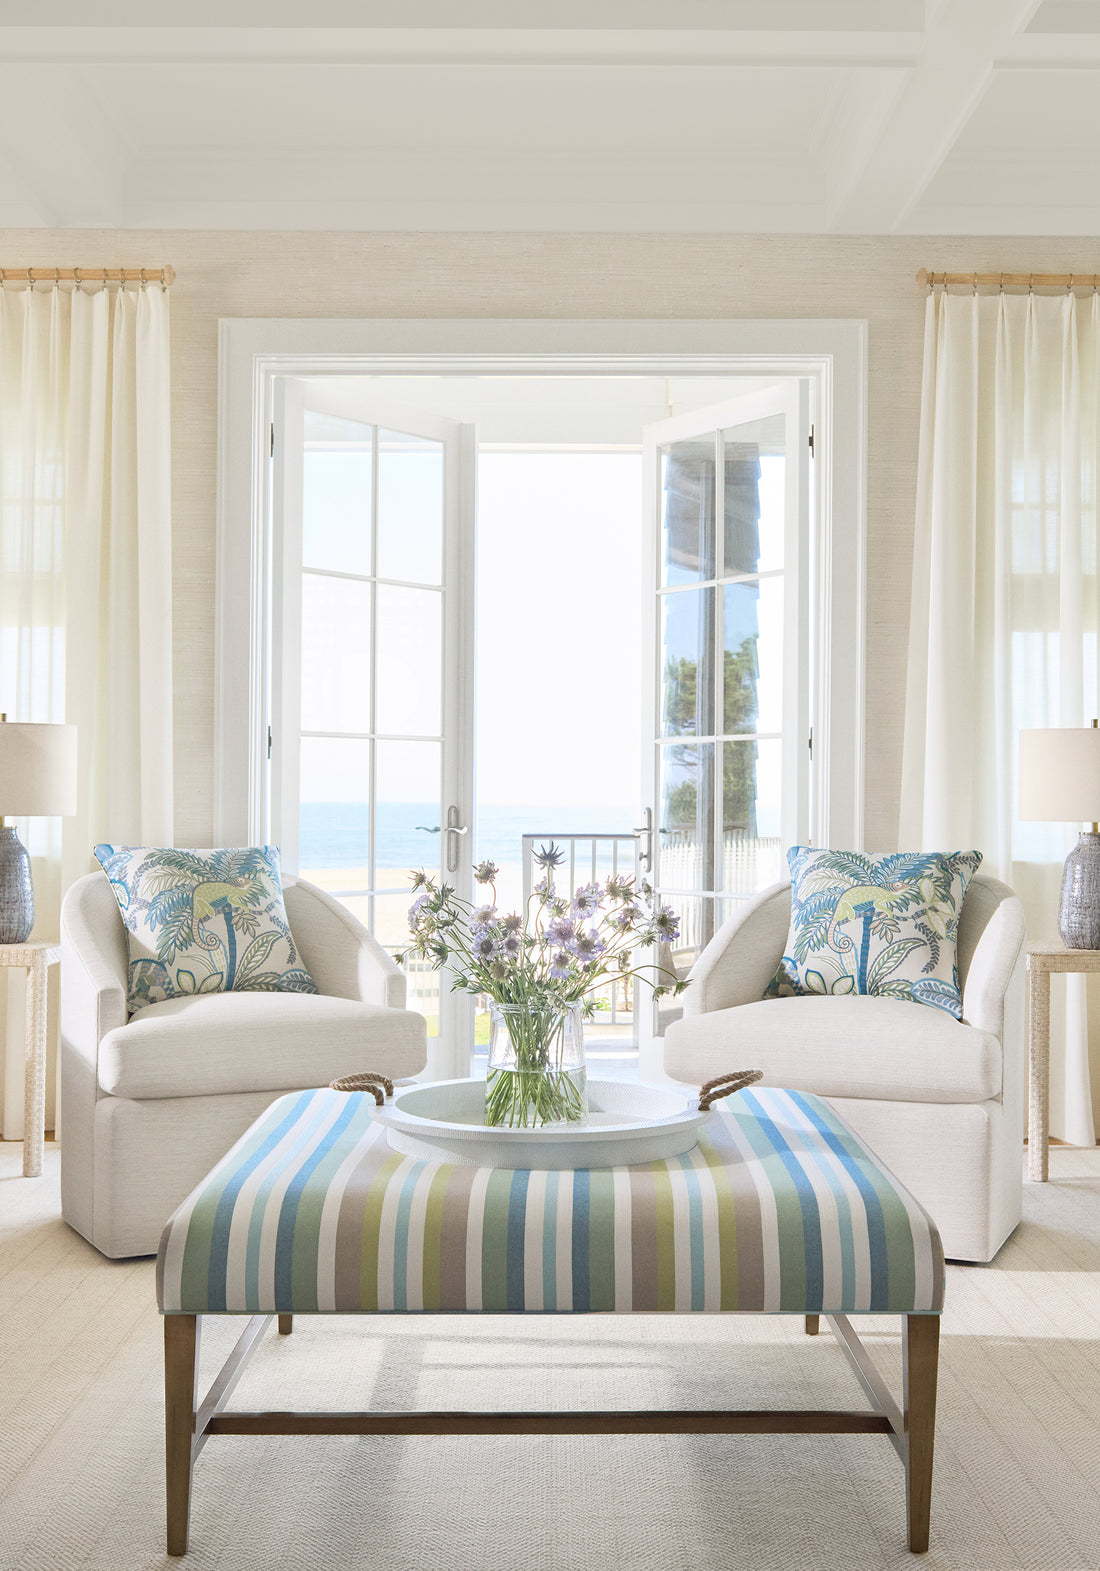 Living room with drapery panels in Asher woven fabric in natural color by Thibaut fabrics